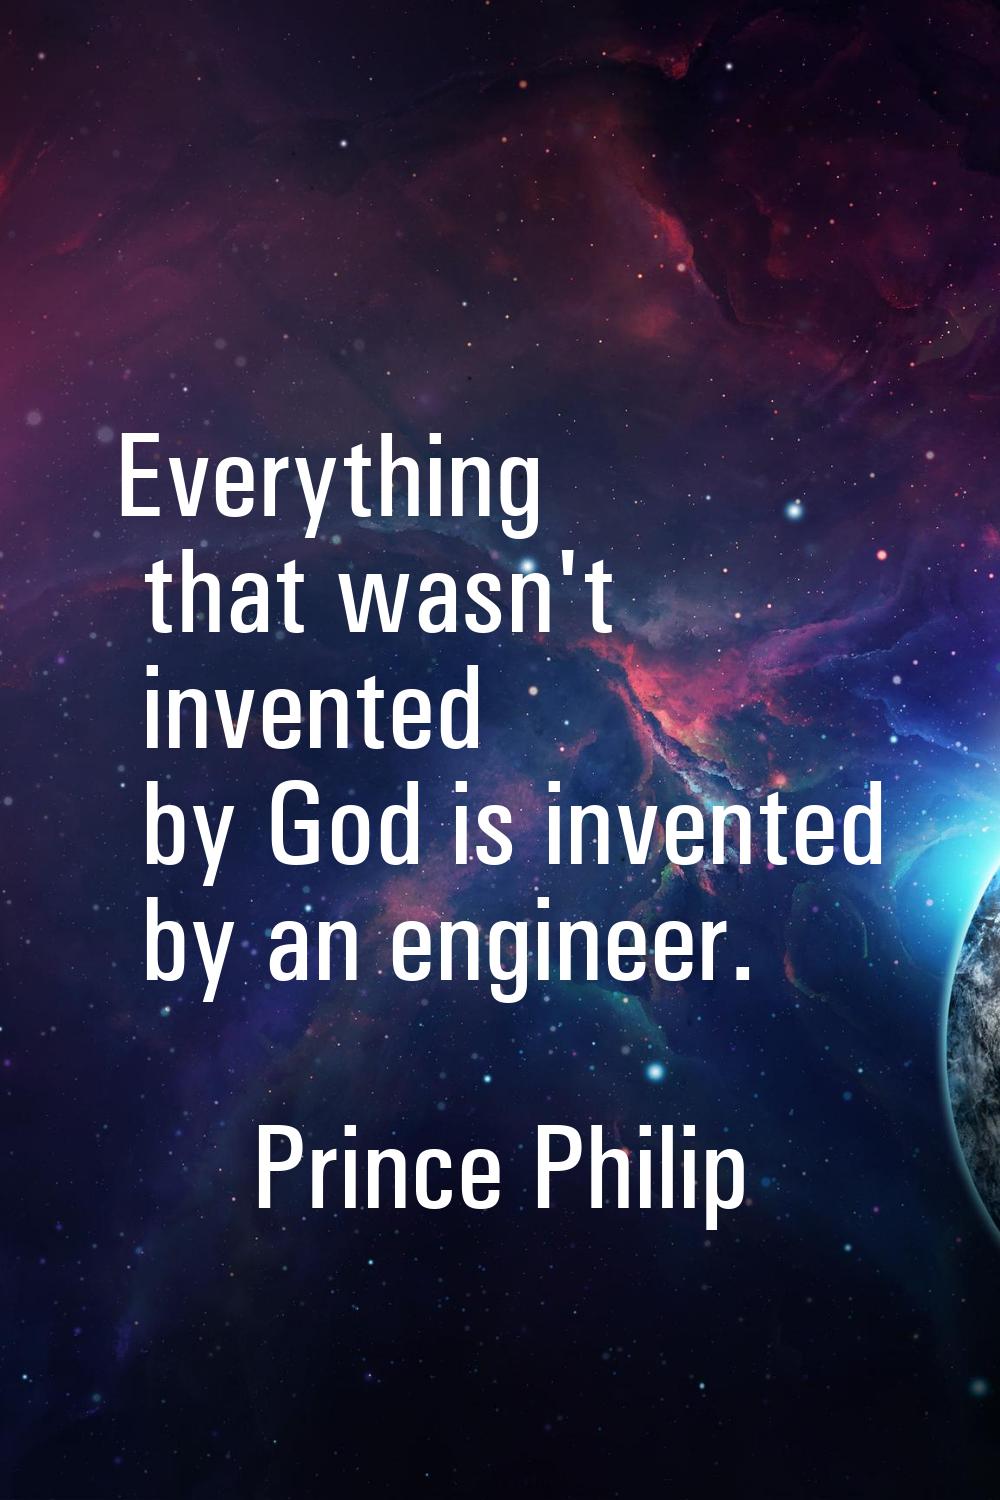 Everything that wasn't invented by God is invented by an engineer.